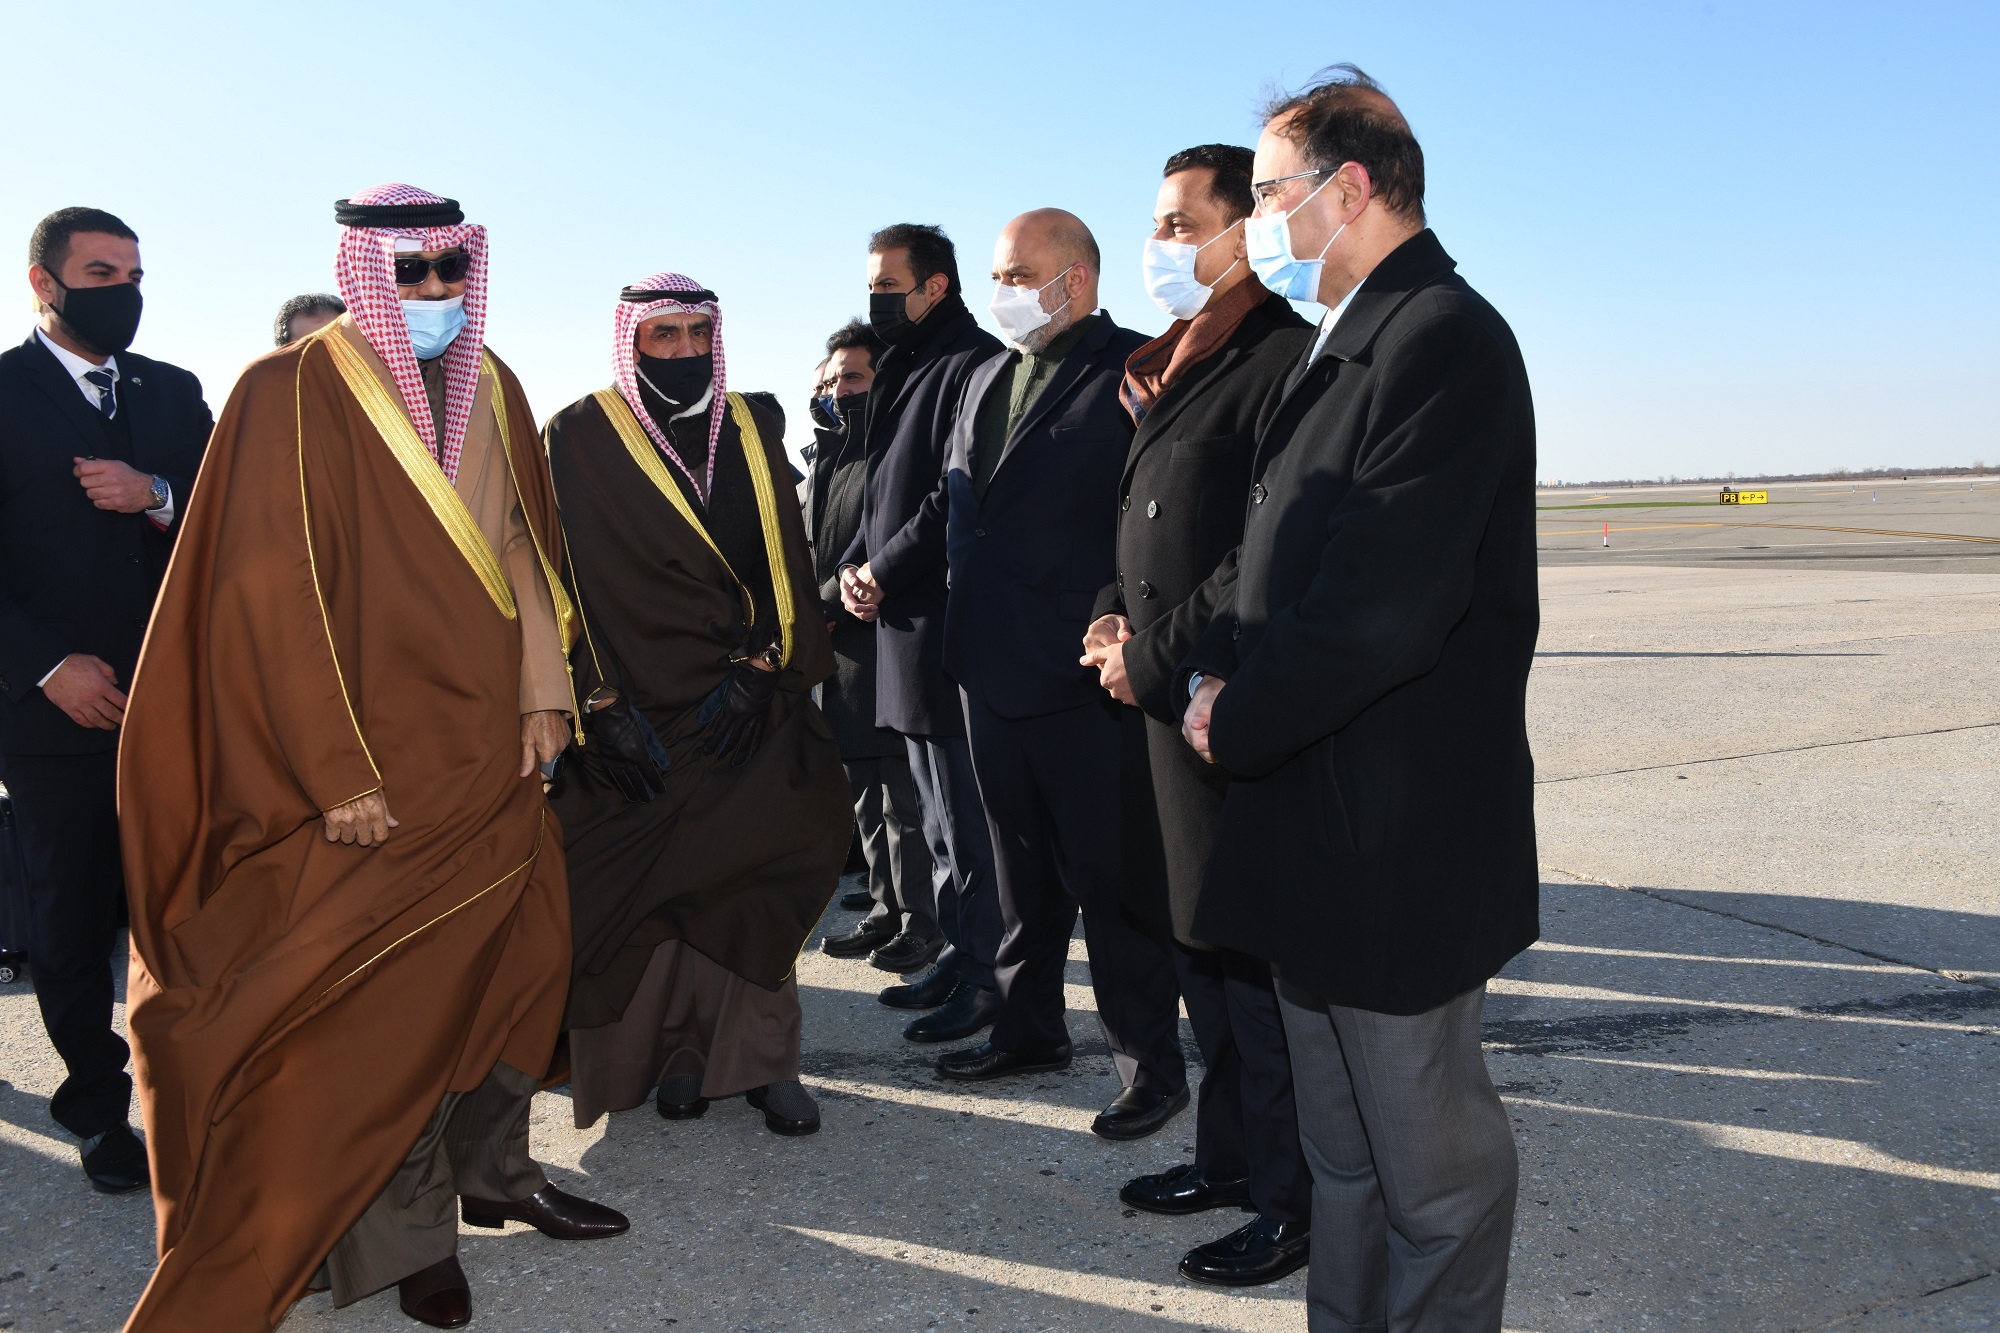 His Highness the Amir Sheikh Nawaf Al-Ahmad Al-Jaber Al-Sabah departs the United States heading to Europe on a private visit